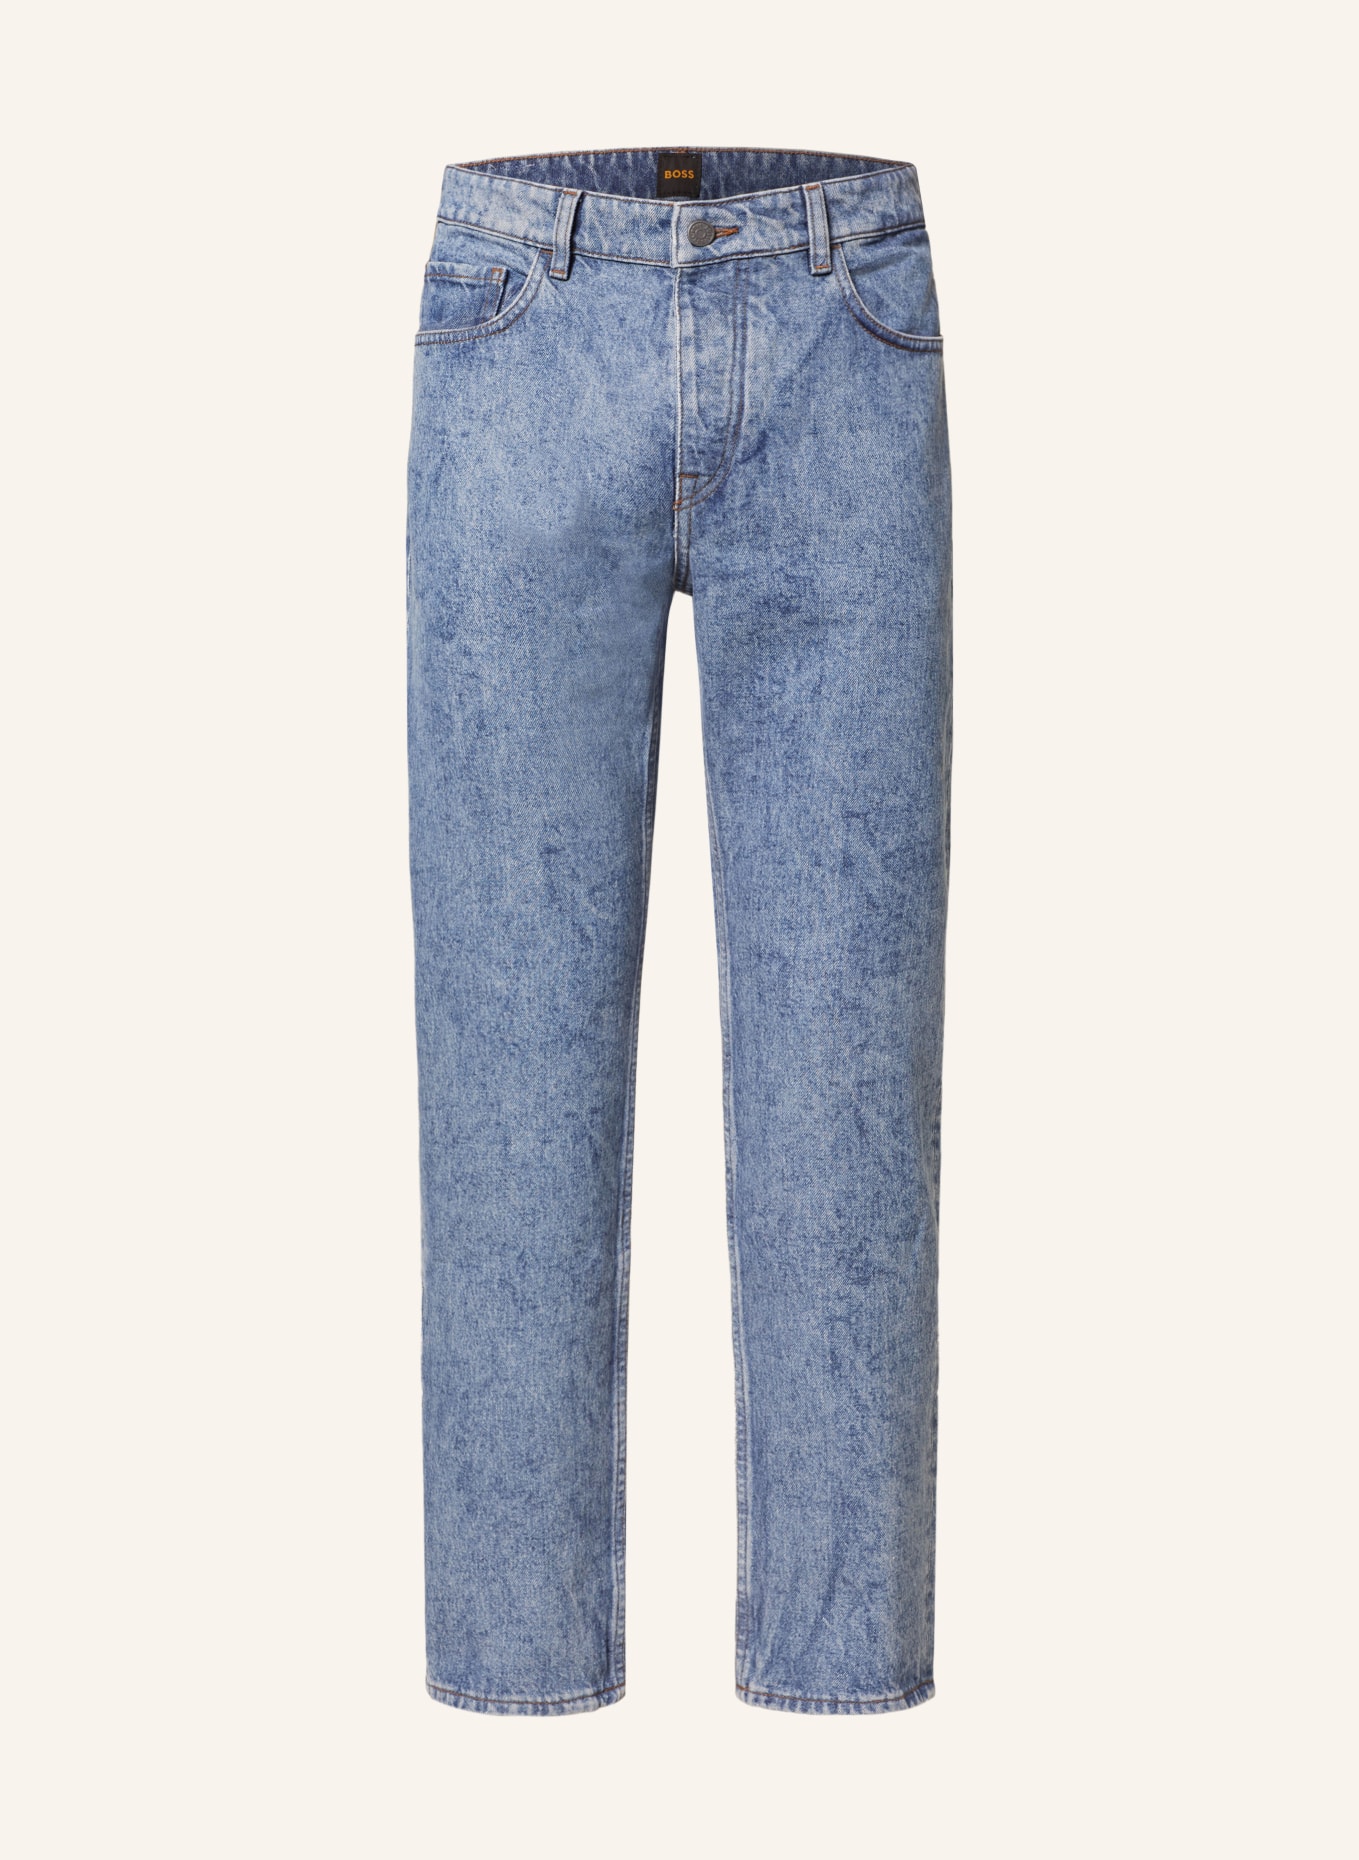 BOSS Jeans ANDERSON Relaxed Fit, Farbe: BLAU (Bild 1)